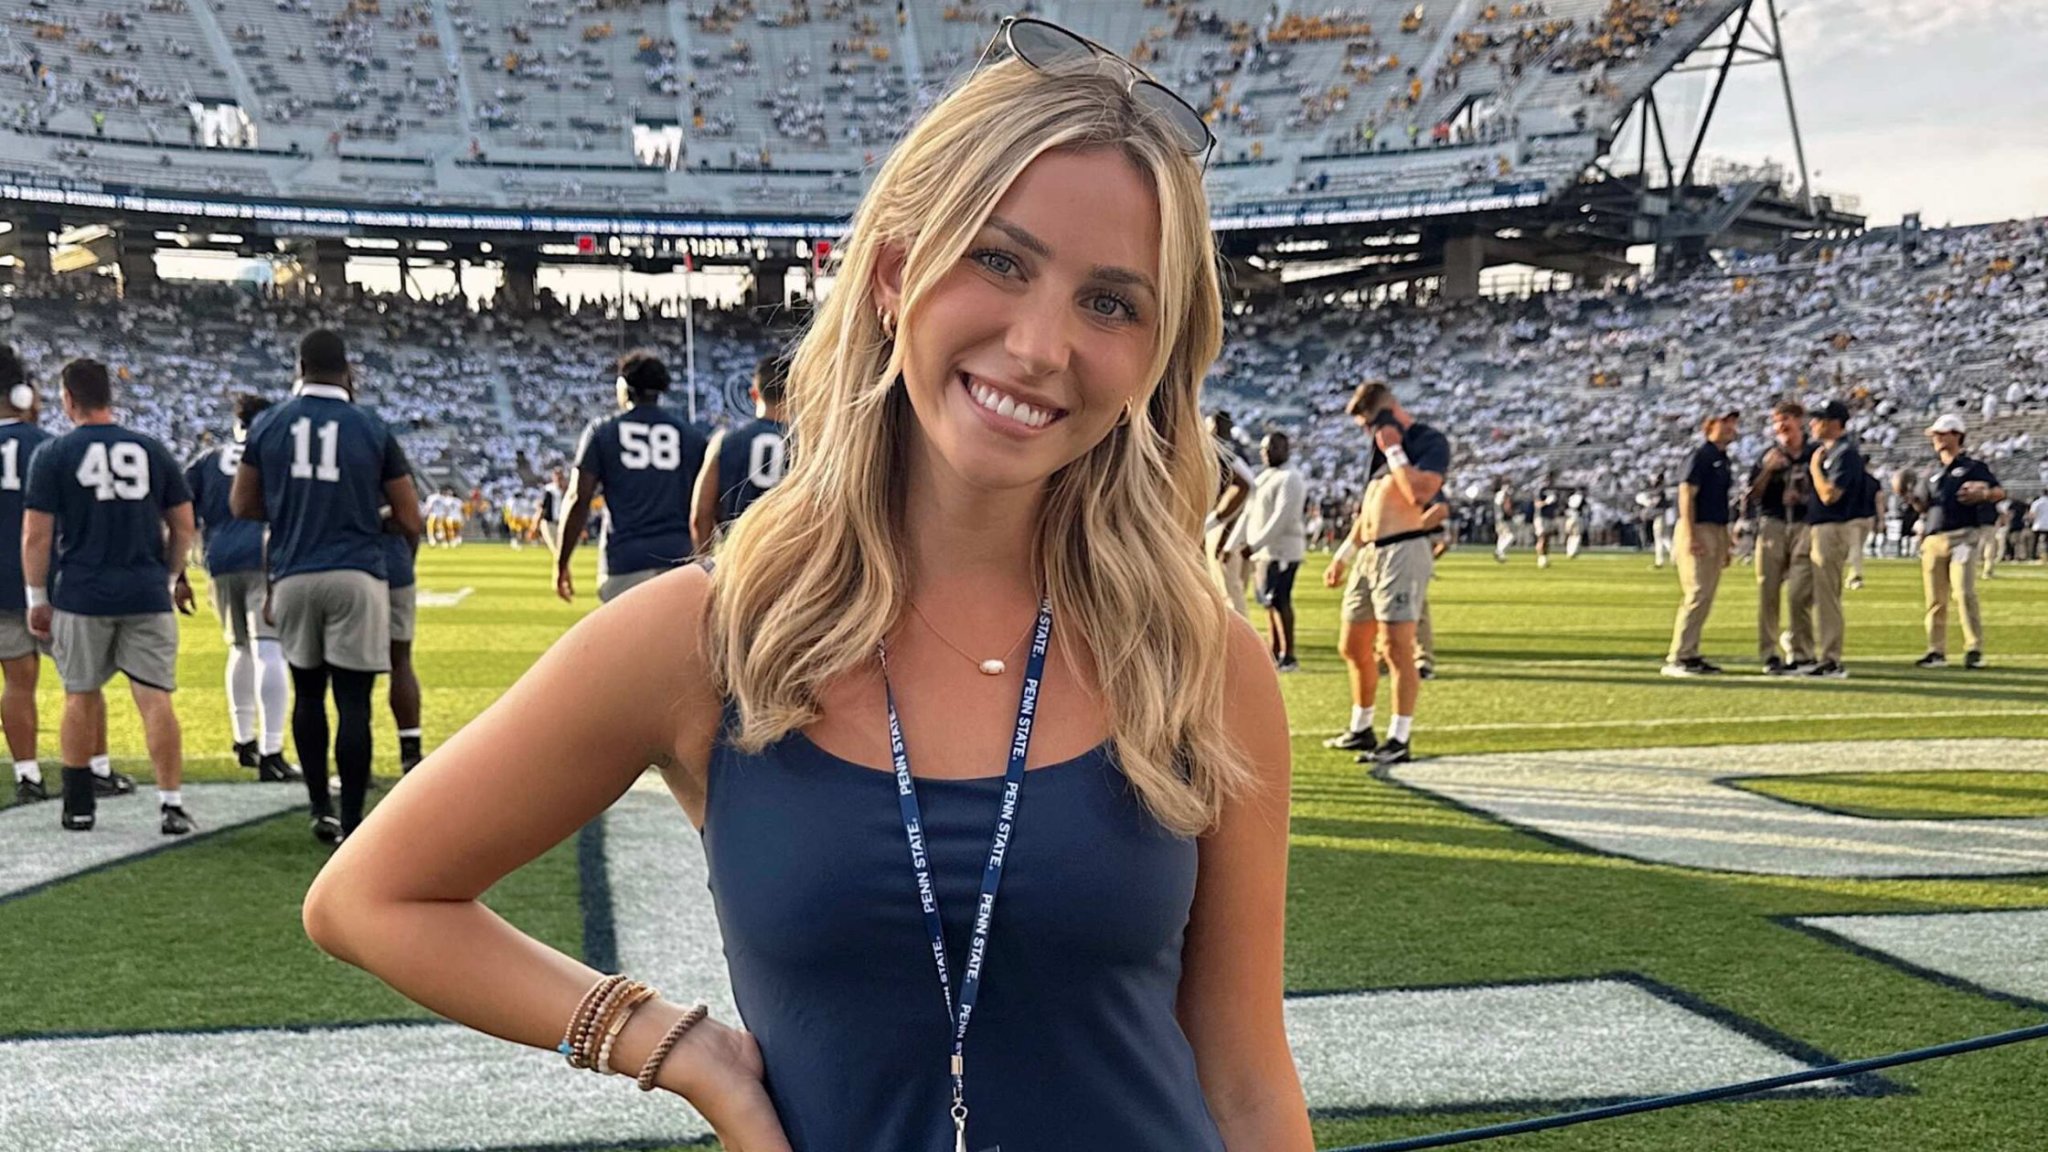 Katie Feeney’s Dual Life: How A Penn State Student Juggles College And Sports Broadcasting Goals With 7M+ Followers